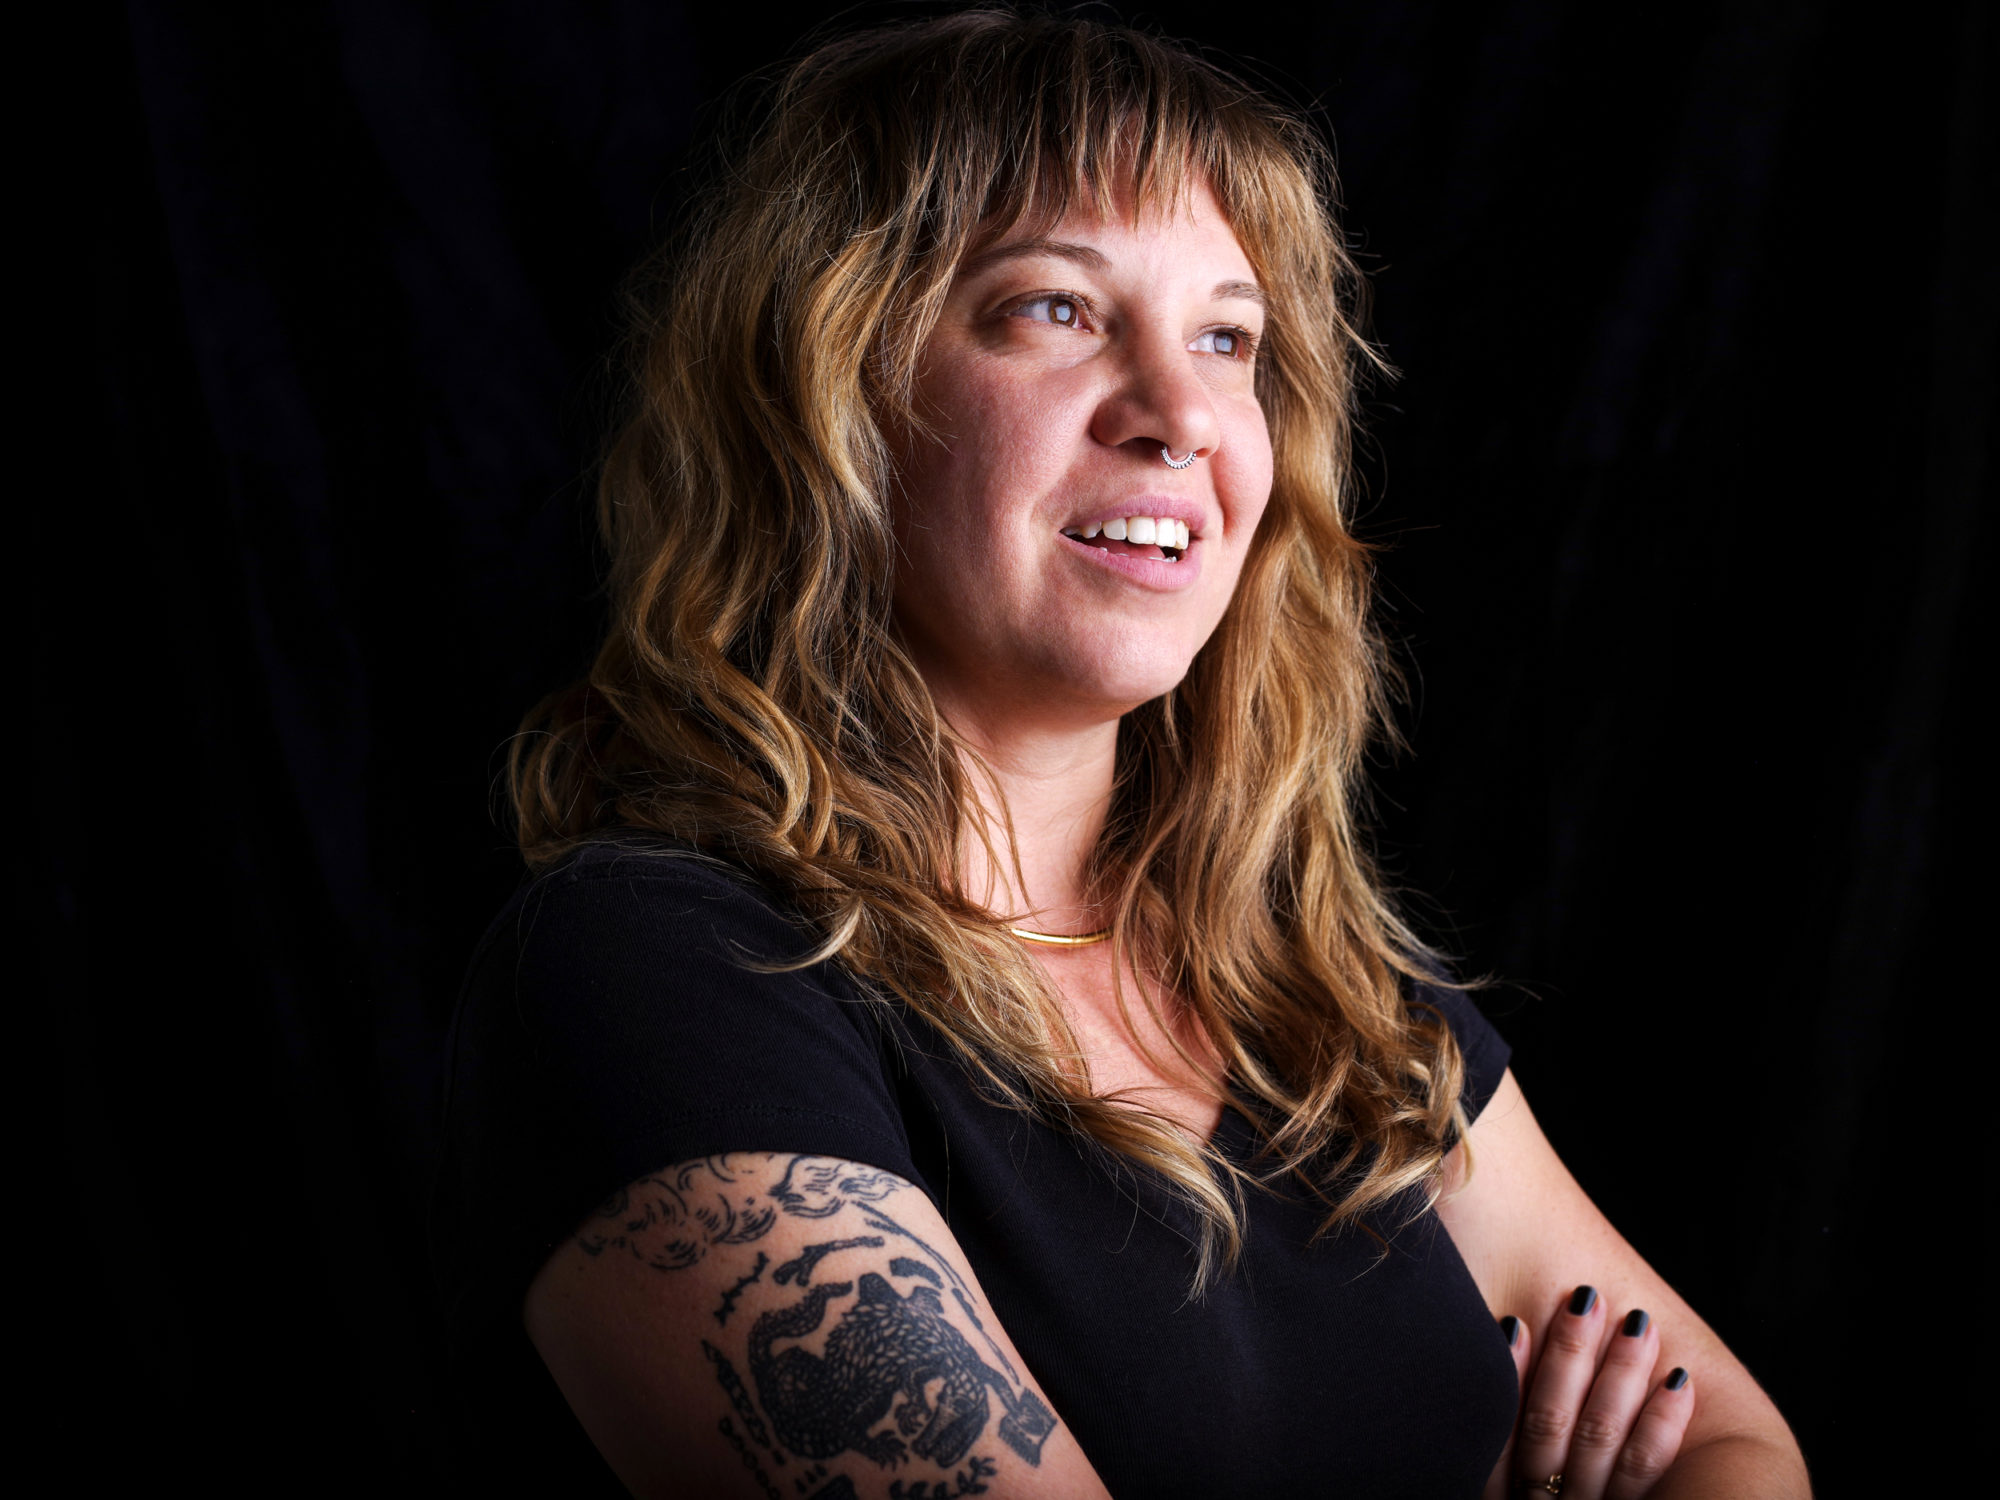 woman with wavy hair and tattoos crossing her arms in a black shirt against black background.